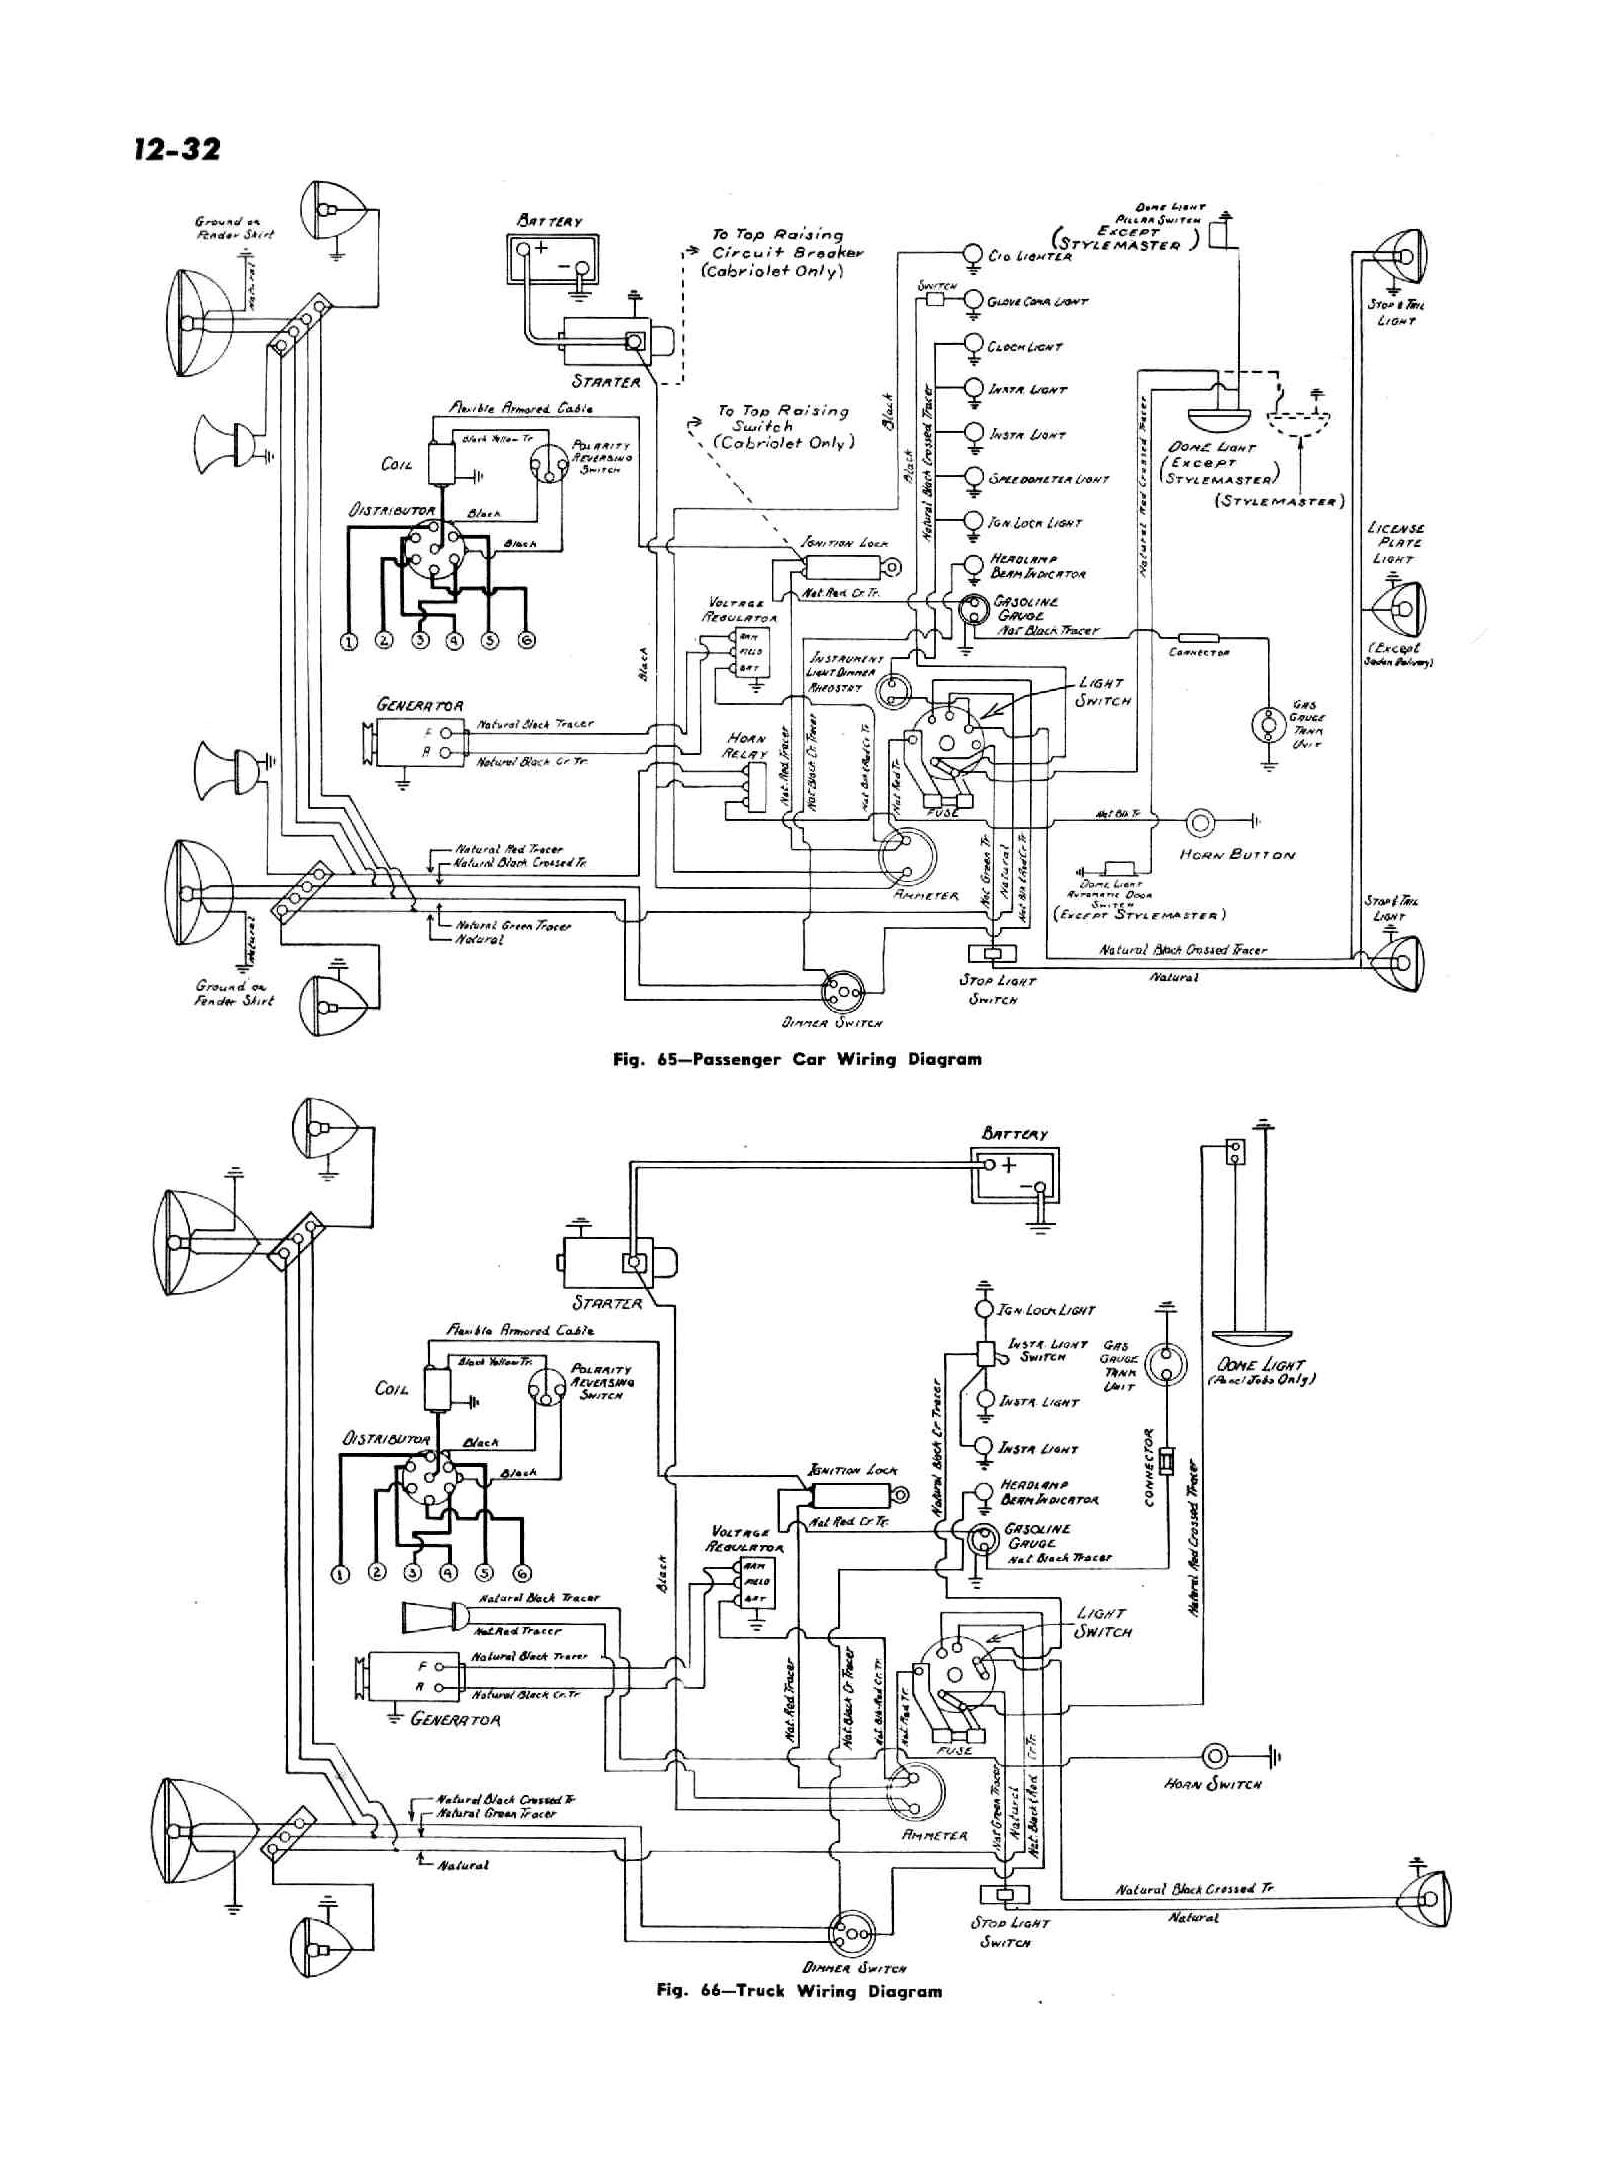 Chevy Truck Wiring Diagram Wiring Diagrams Of Chevy Truck Wiring Diagram